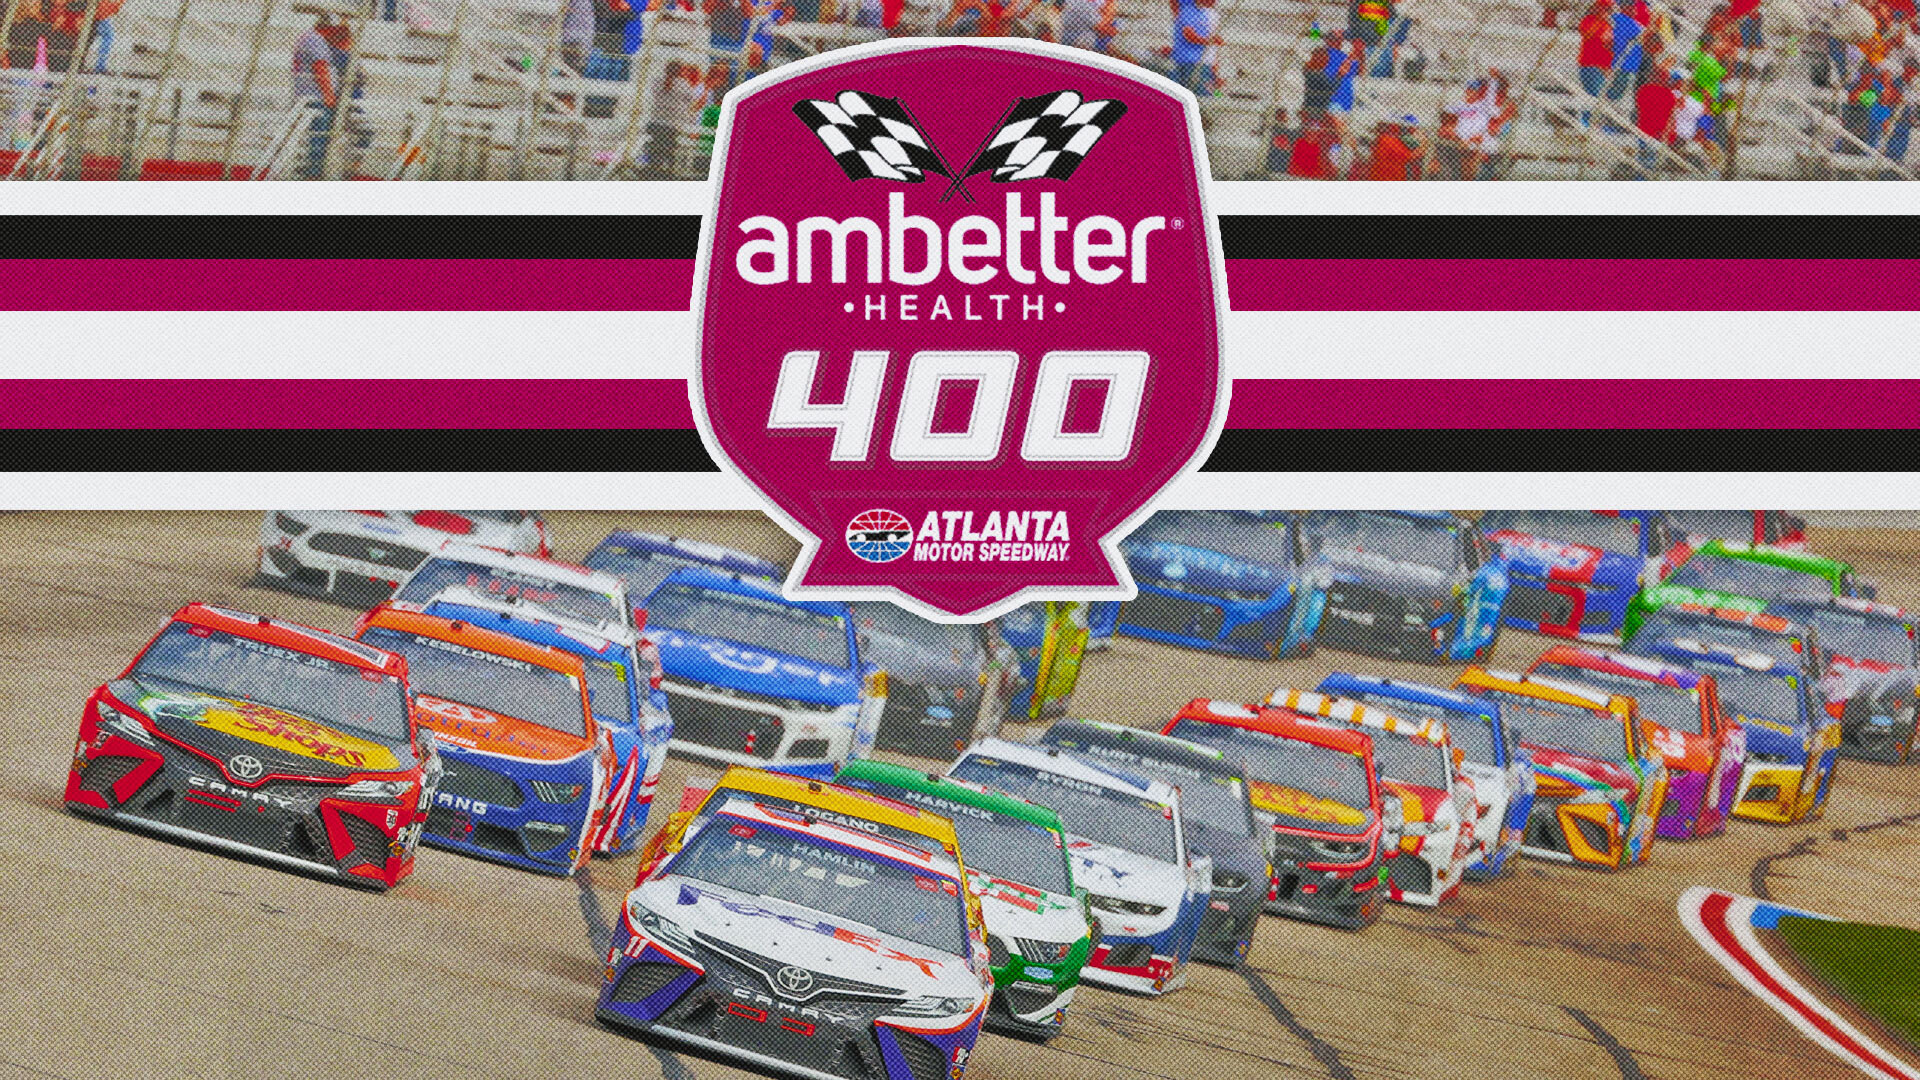 Ambetter Health 400 highlights: Top moments from Atlanta Motor Speedway